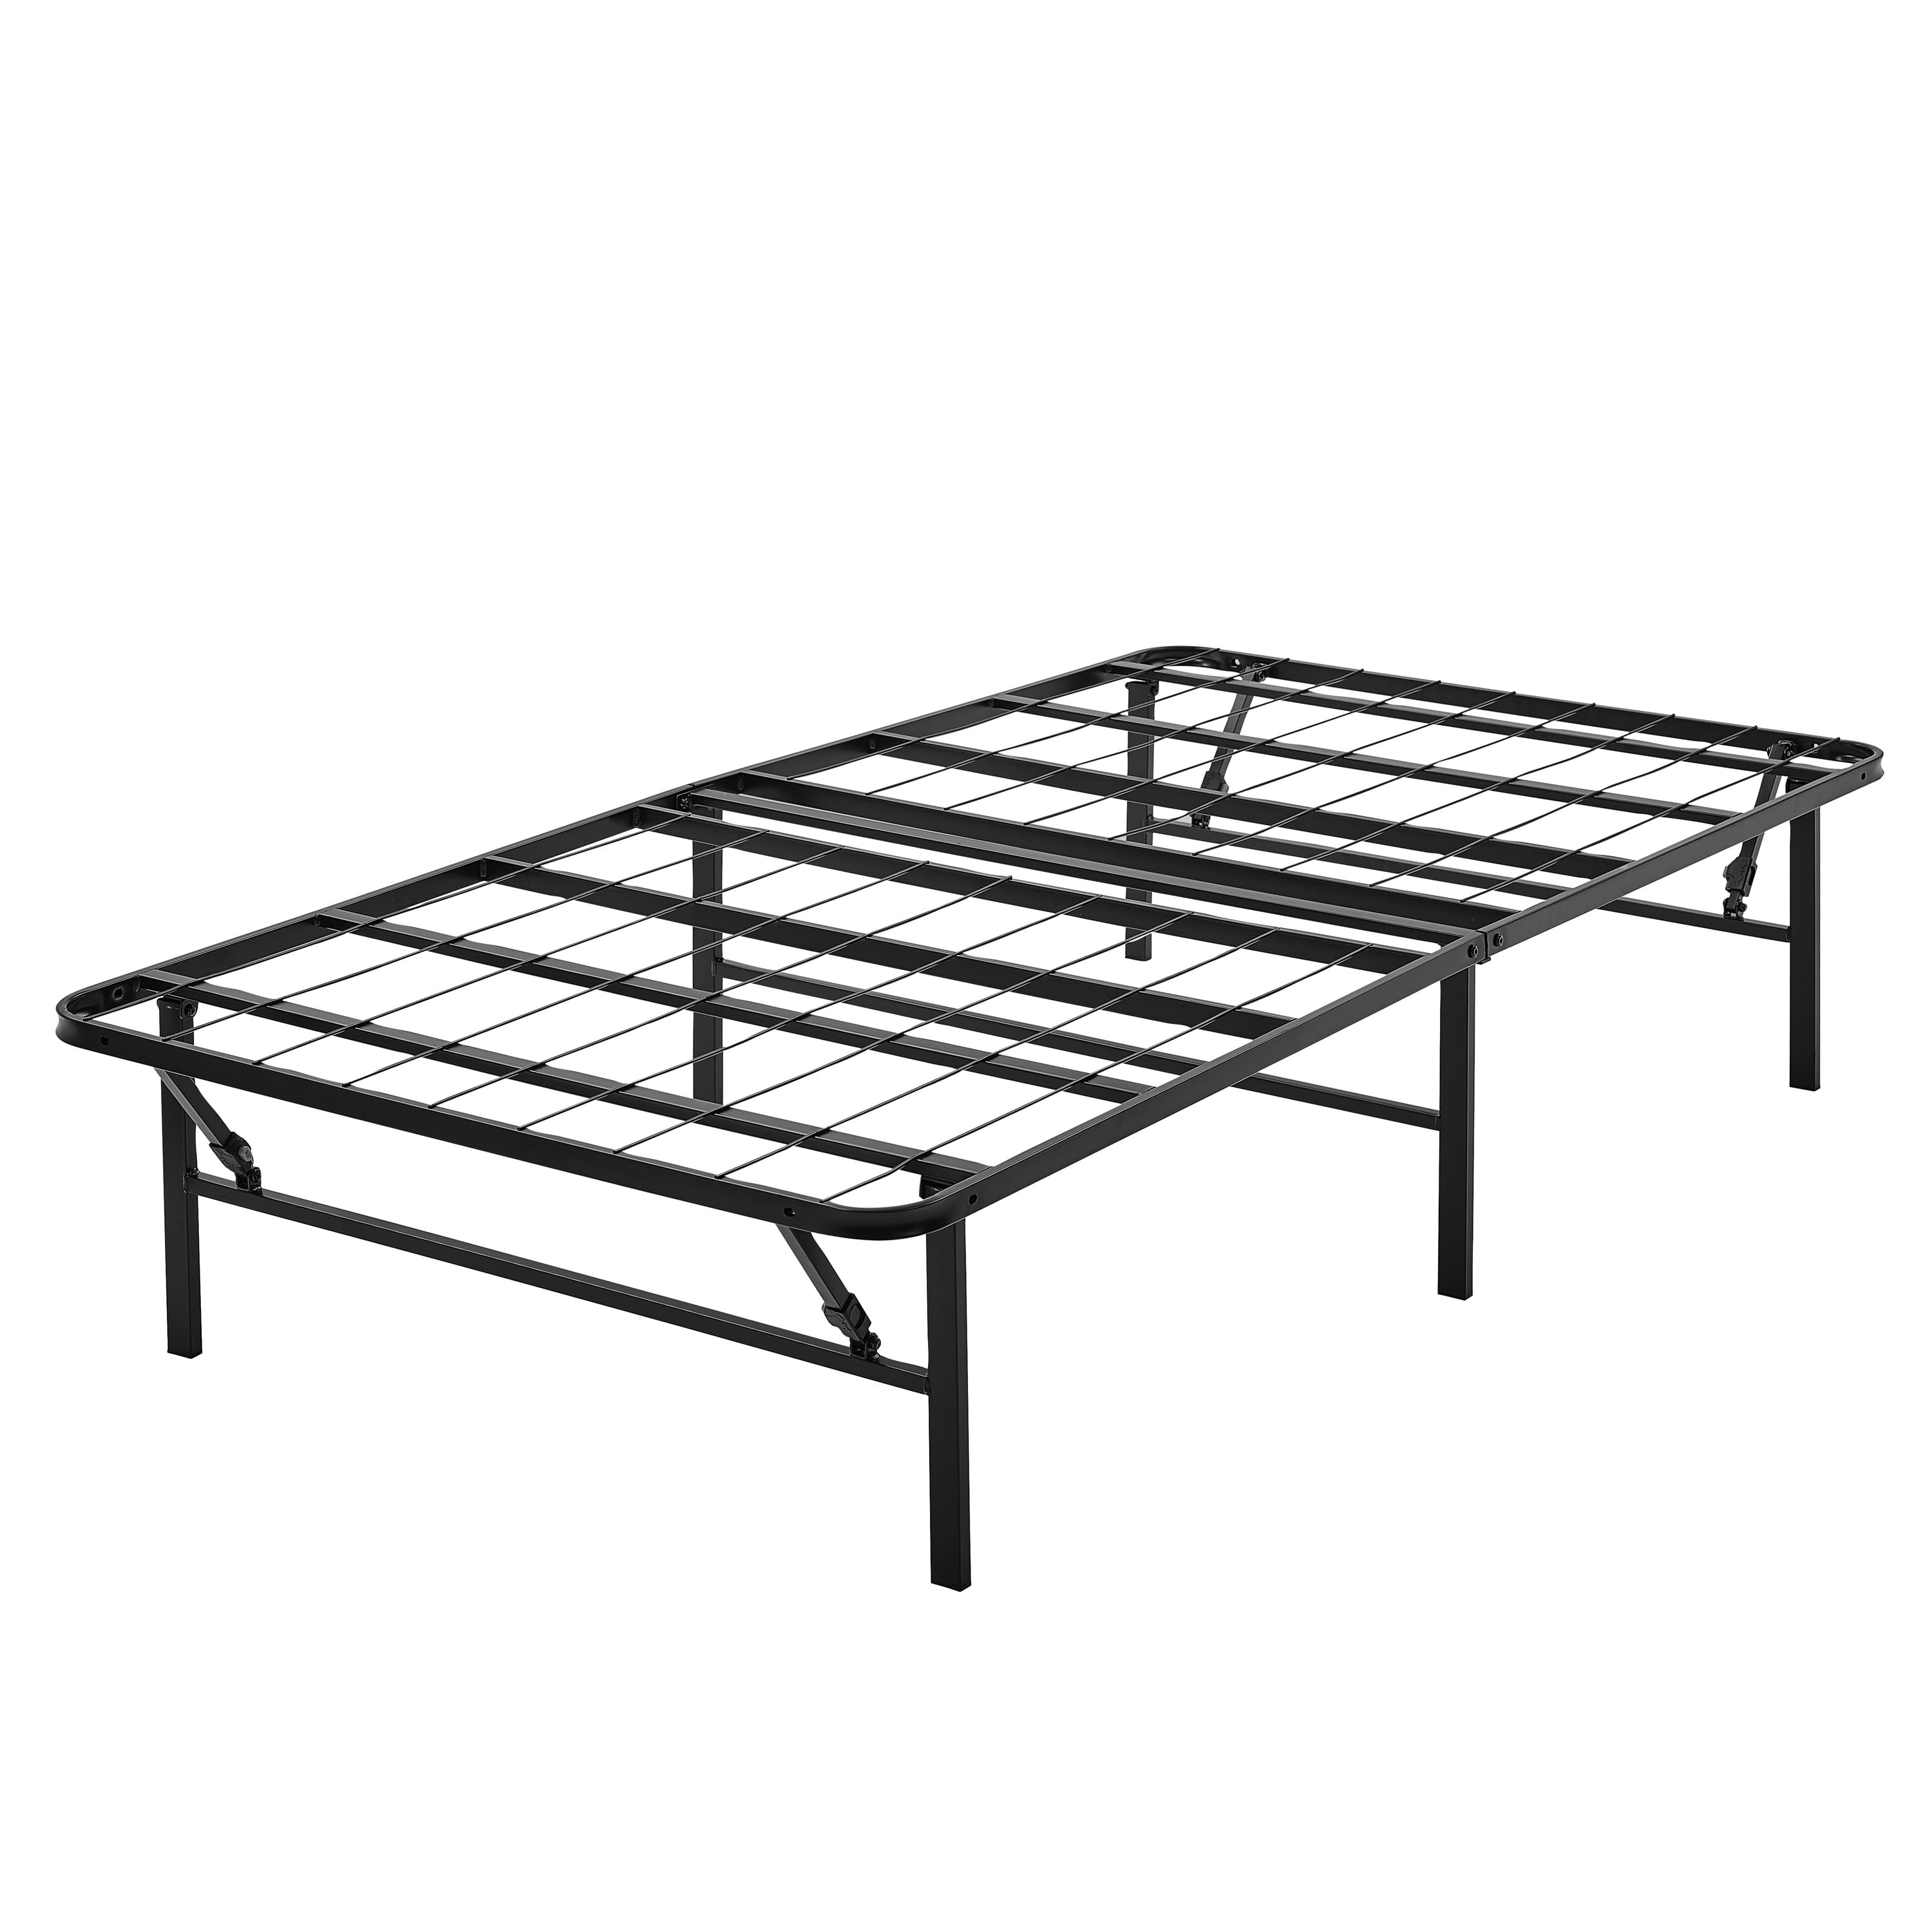 Profile Foldable Steel Bed Frame, Folding Twin Size Bed Frame